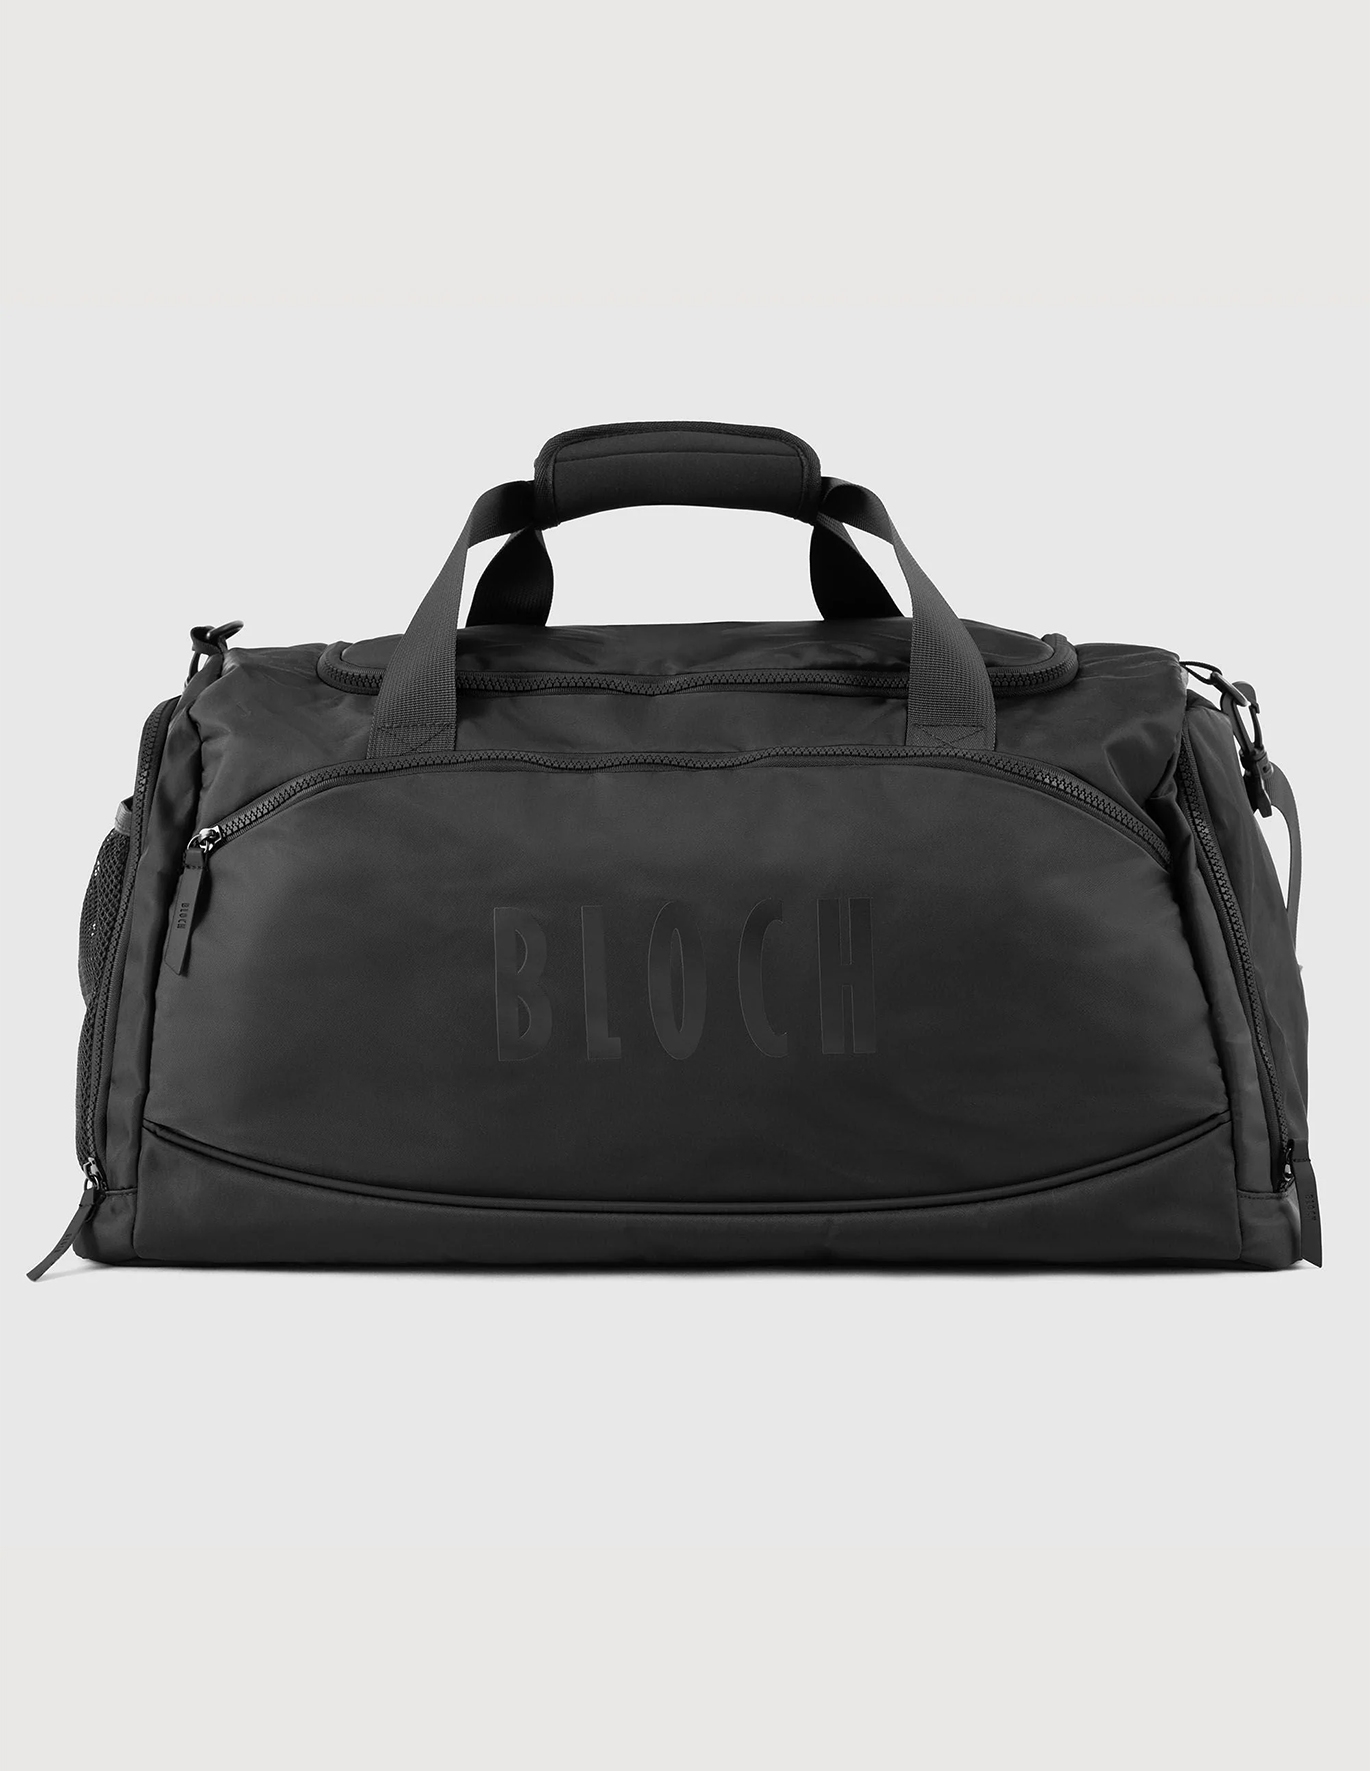 Bloch Troupe Duffle Dance Bag with Shoe Compartment A5328